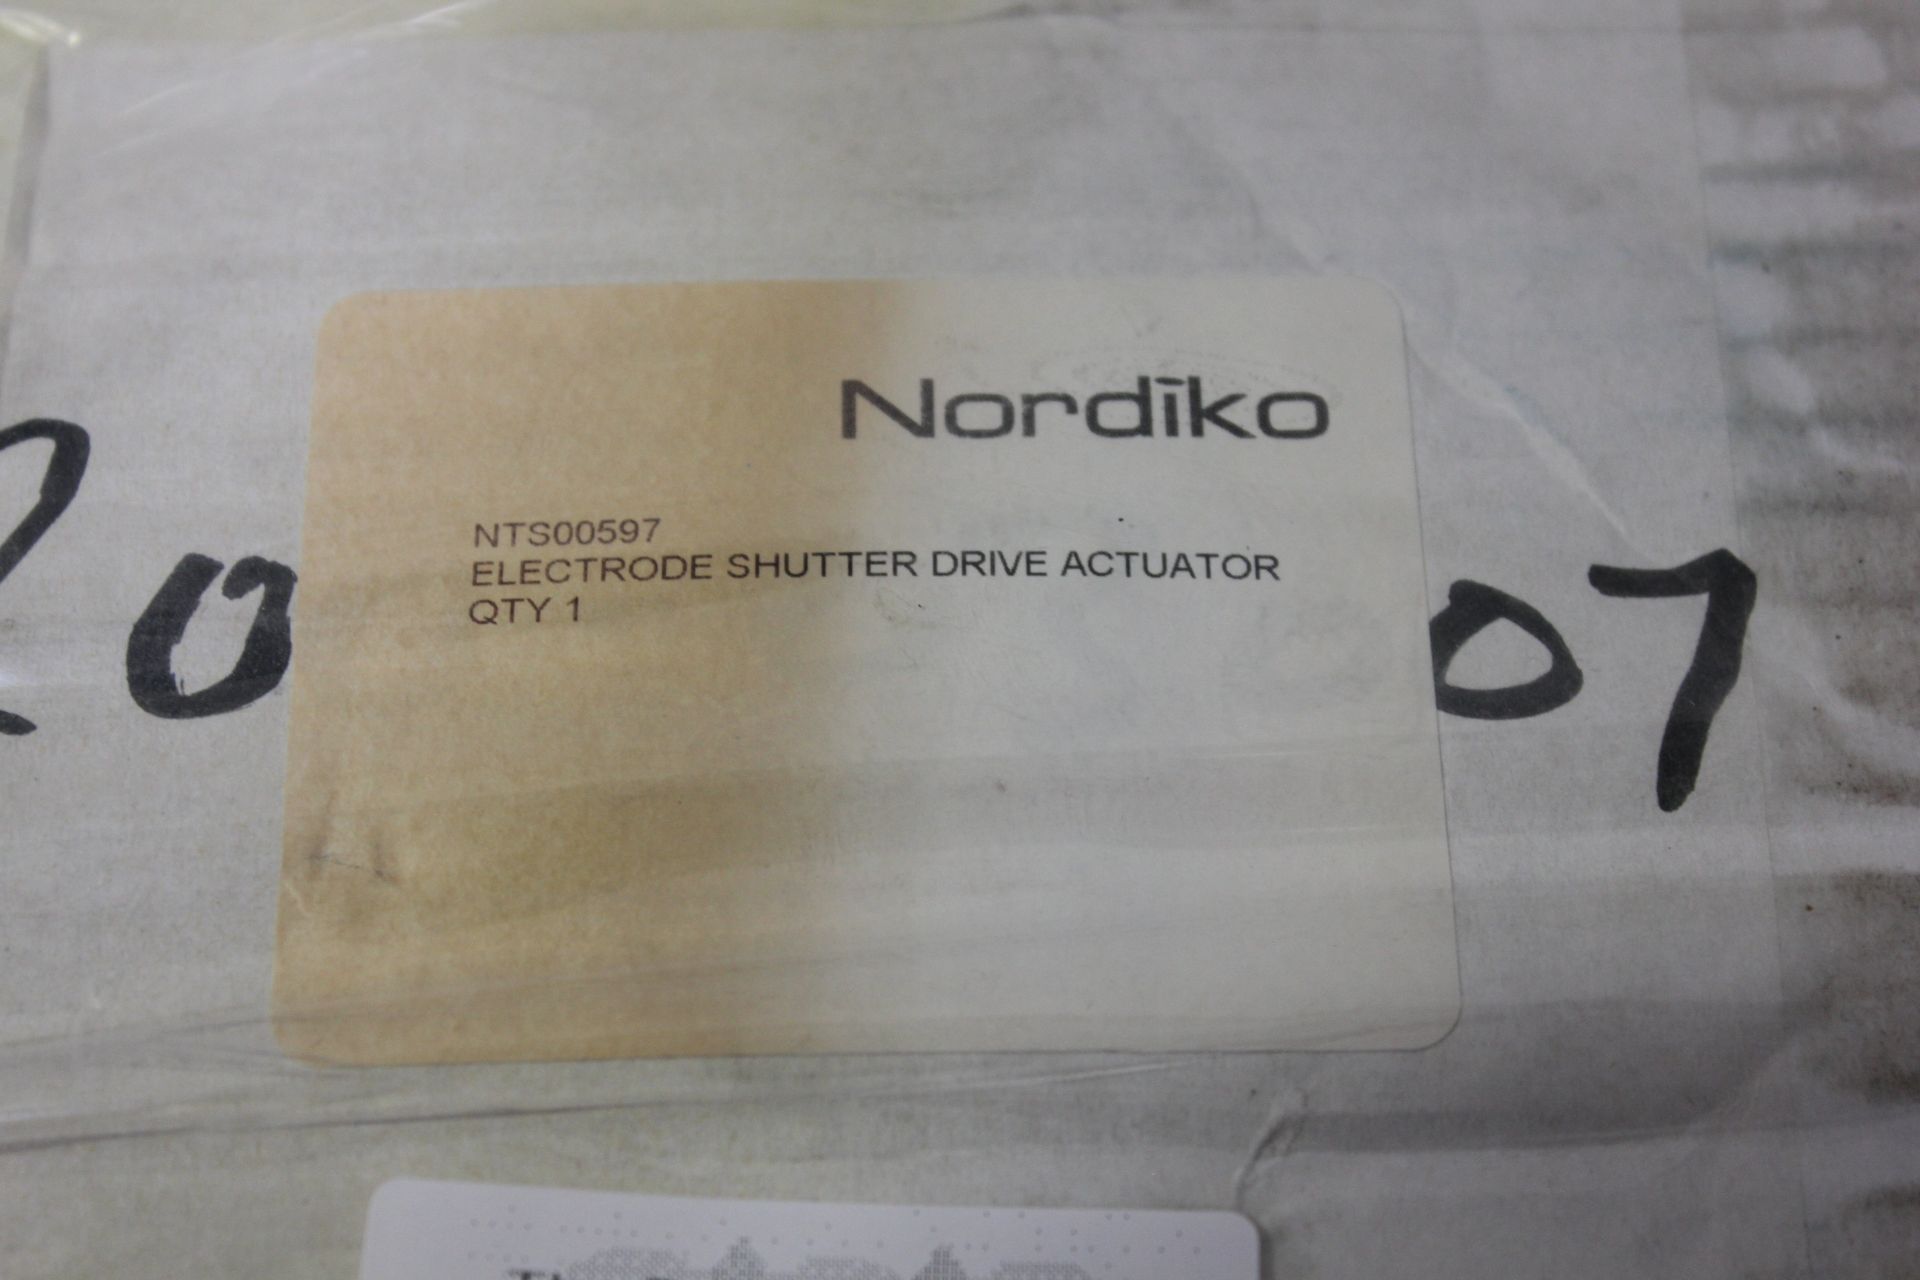 NEW NORDIKO/SPINEA SPUTTERING SYSTEM ELECTRODE SHUTTER DRIVE ACTUATOR - Image 2 of 4